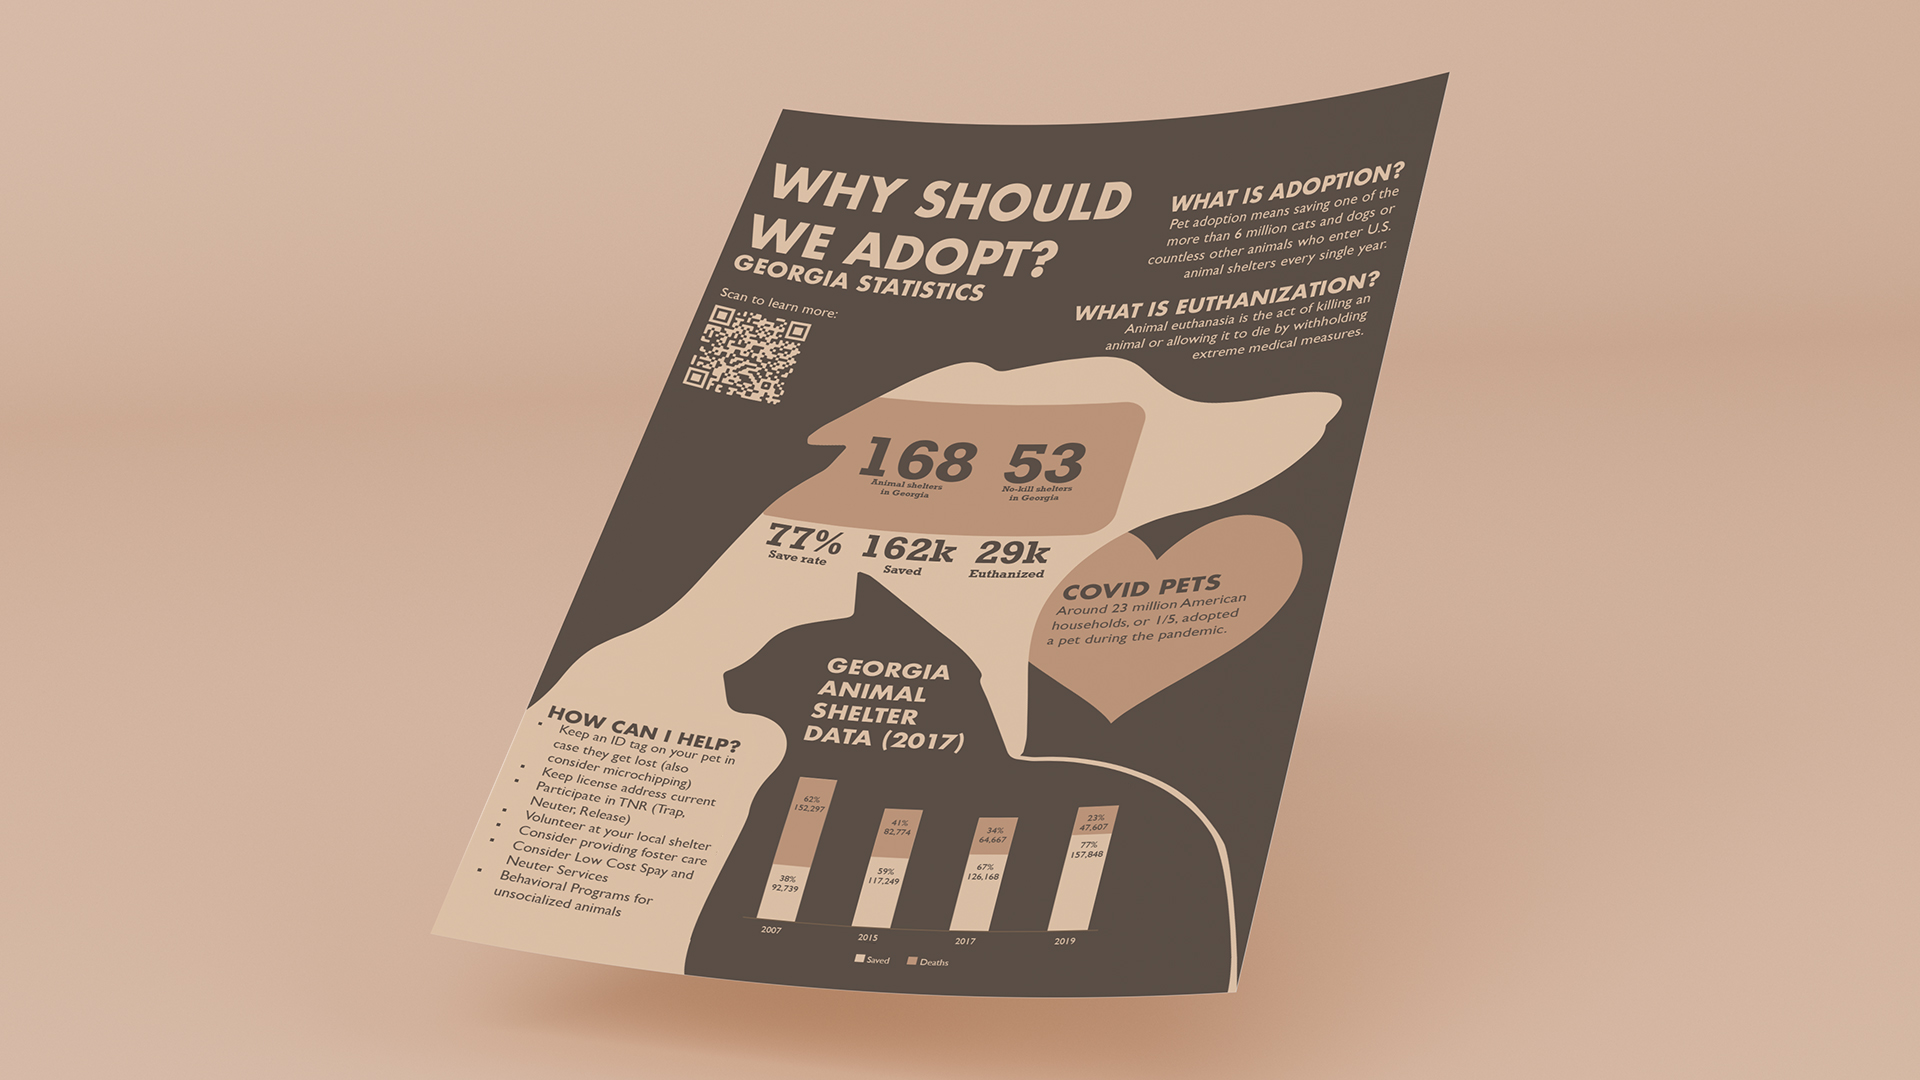 "Adopt, Not Shop: Infographic" / "Adopt, Not Shop: Infographic", infographic poster, 8.5x11 print poster, 2022. This infographic uses Georgia statistics from the previous few years in order to convince the audience why they should adopt, not shop.